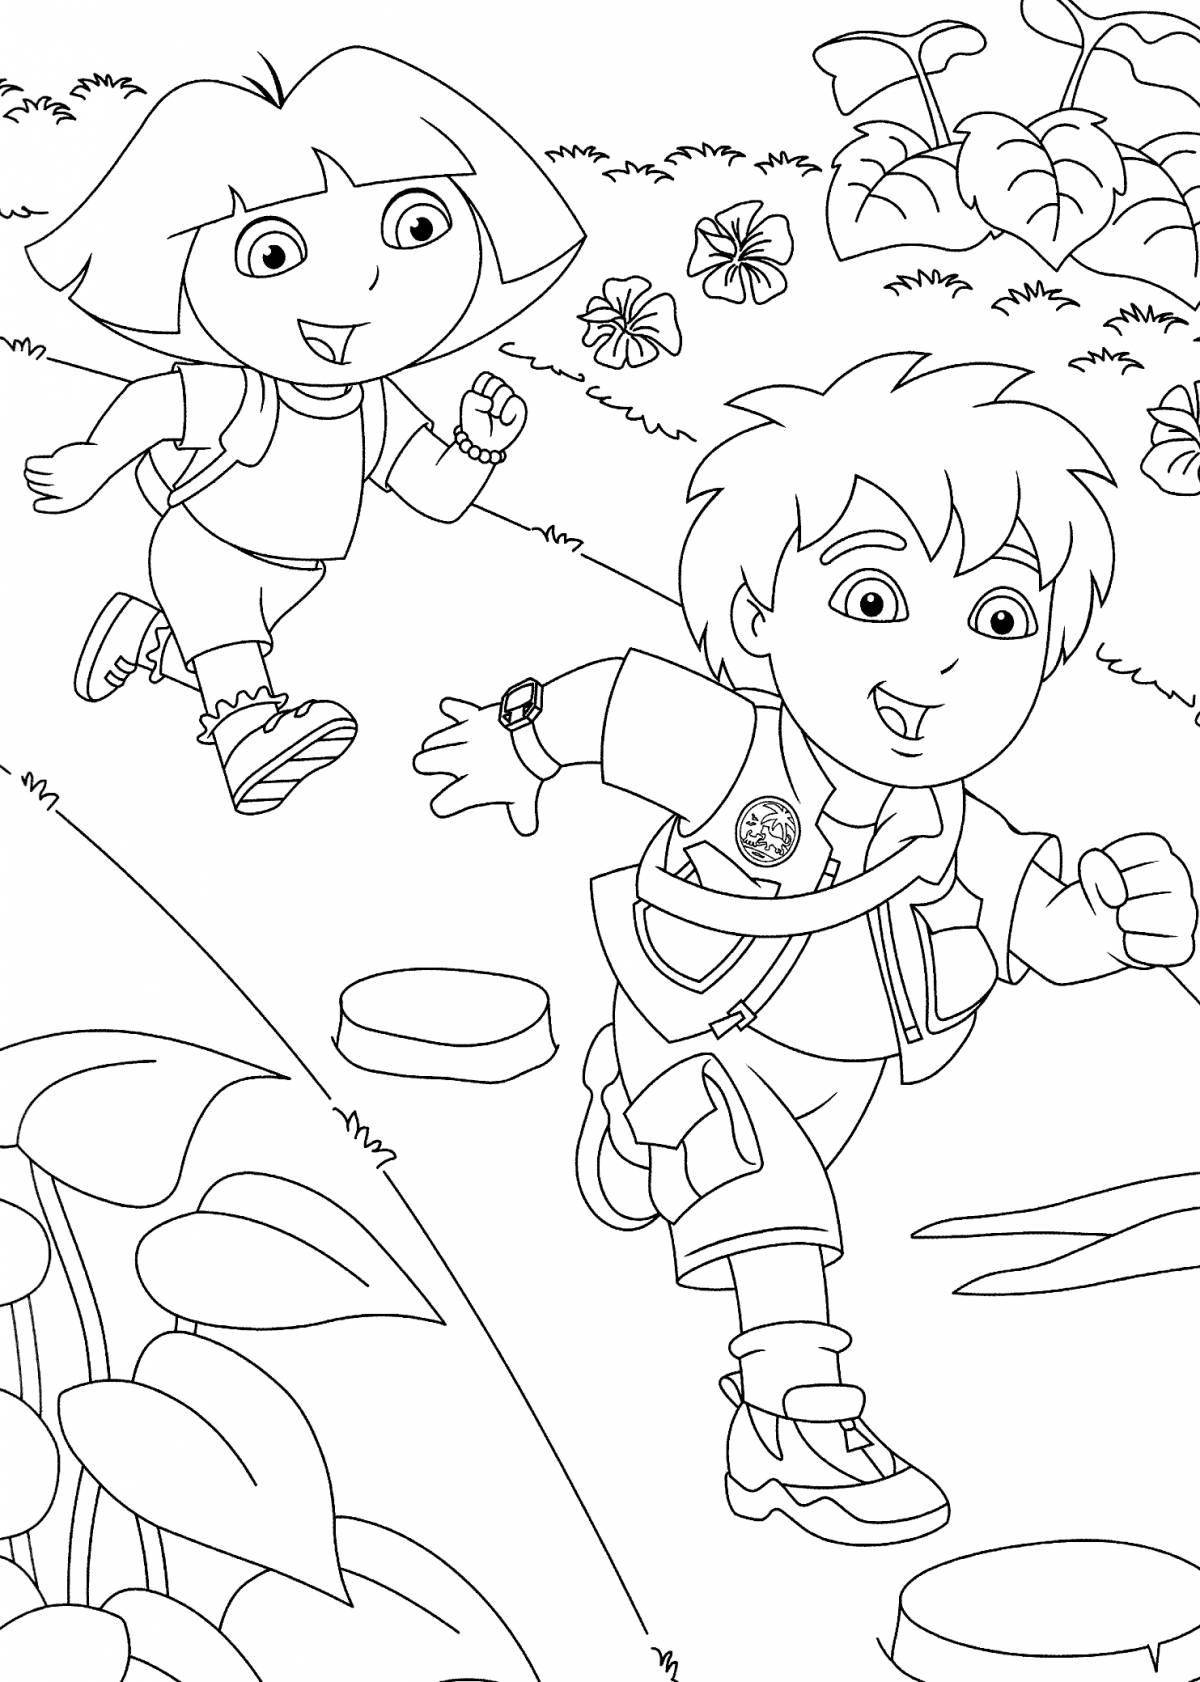 Lovely diego go coloring page